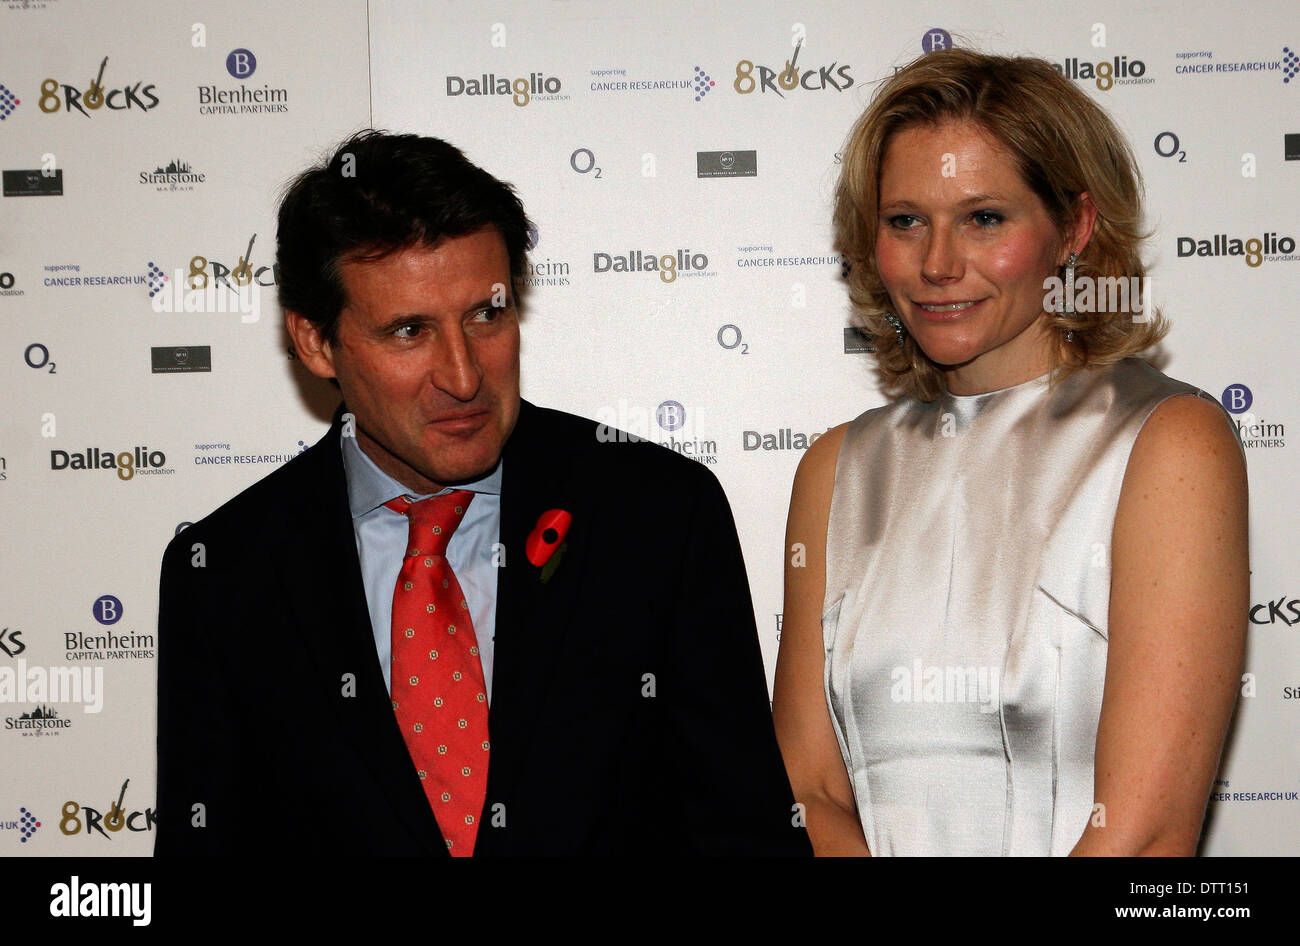 Lord Coe und Partner an der Cancer Research Charity-Veranstaltung in London Stockfoto